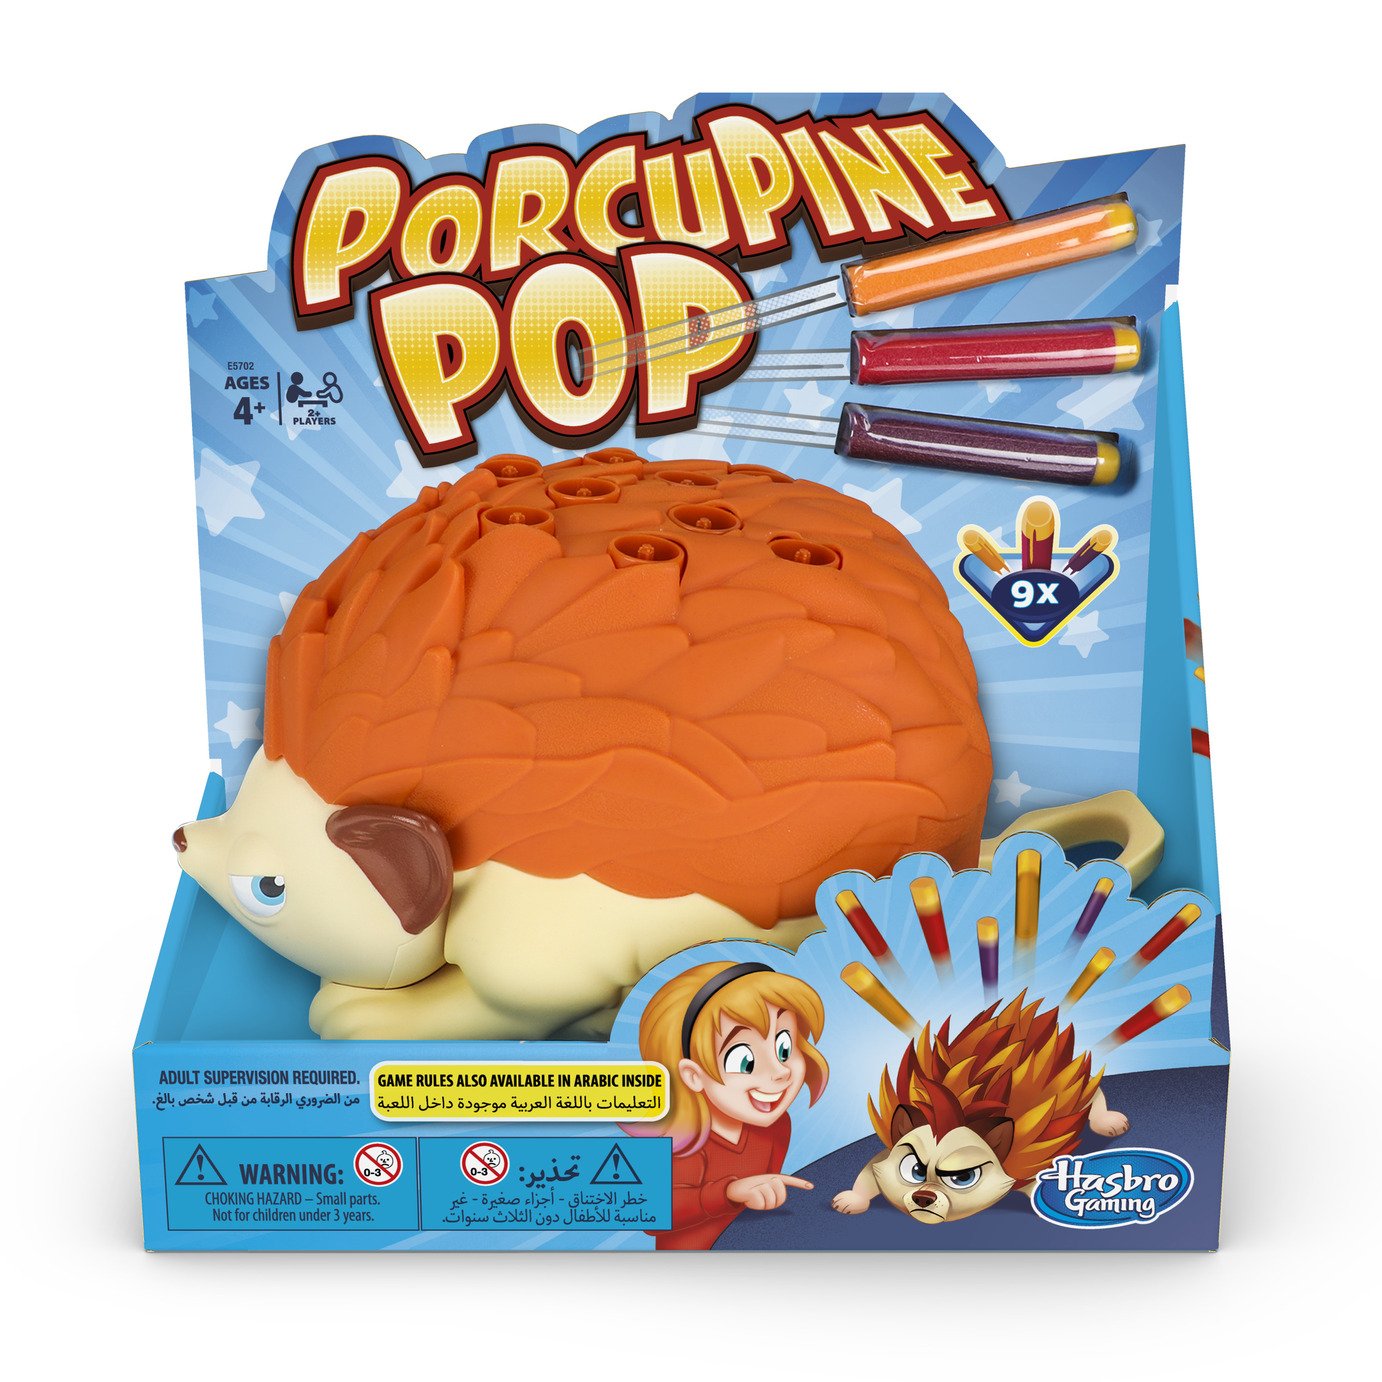 Porcupine Pop Game from Hasbro Gaming